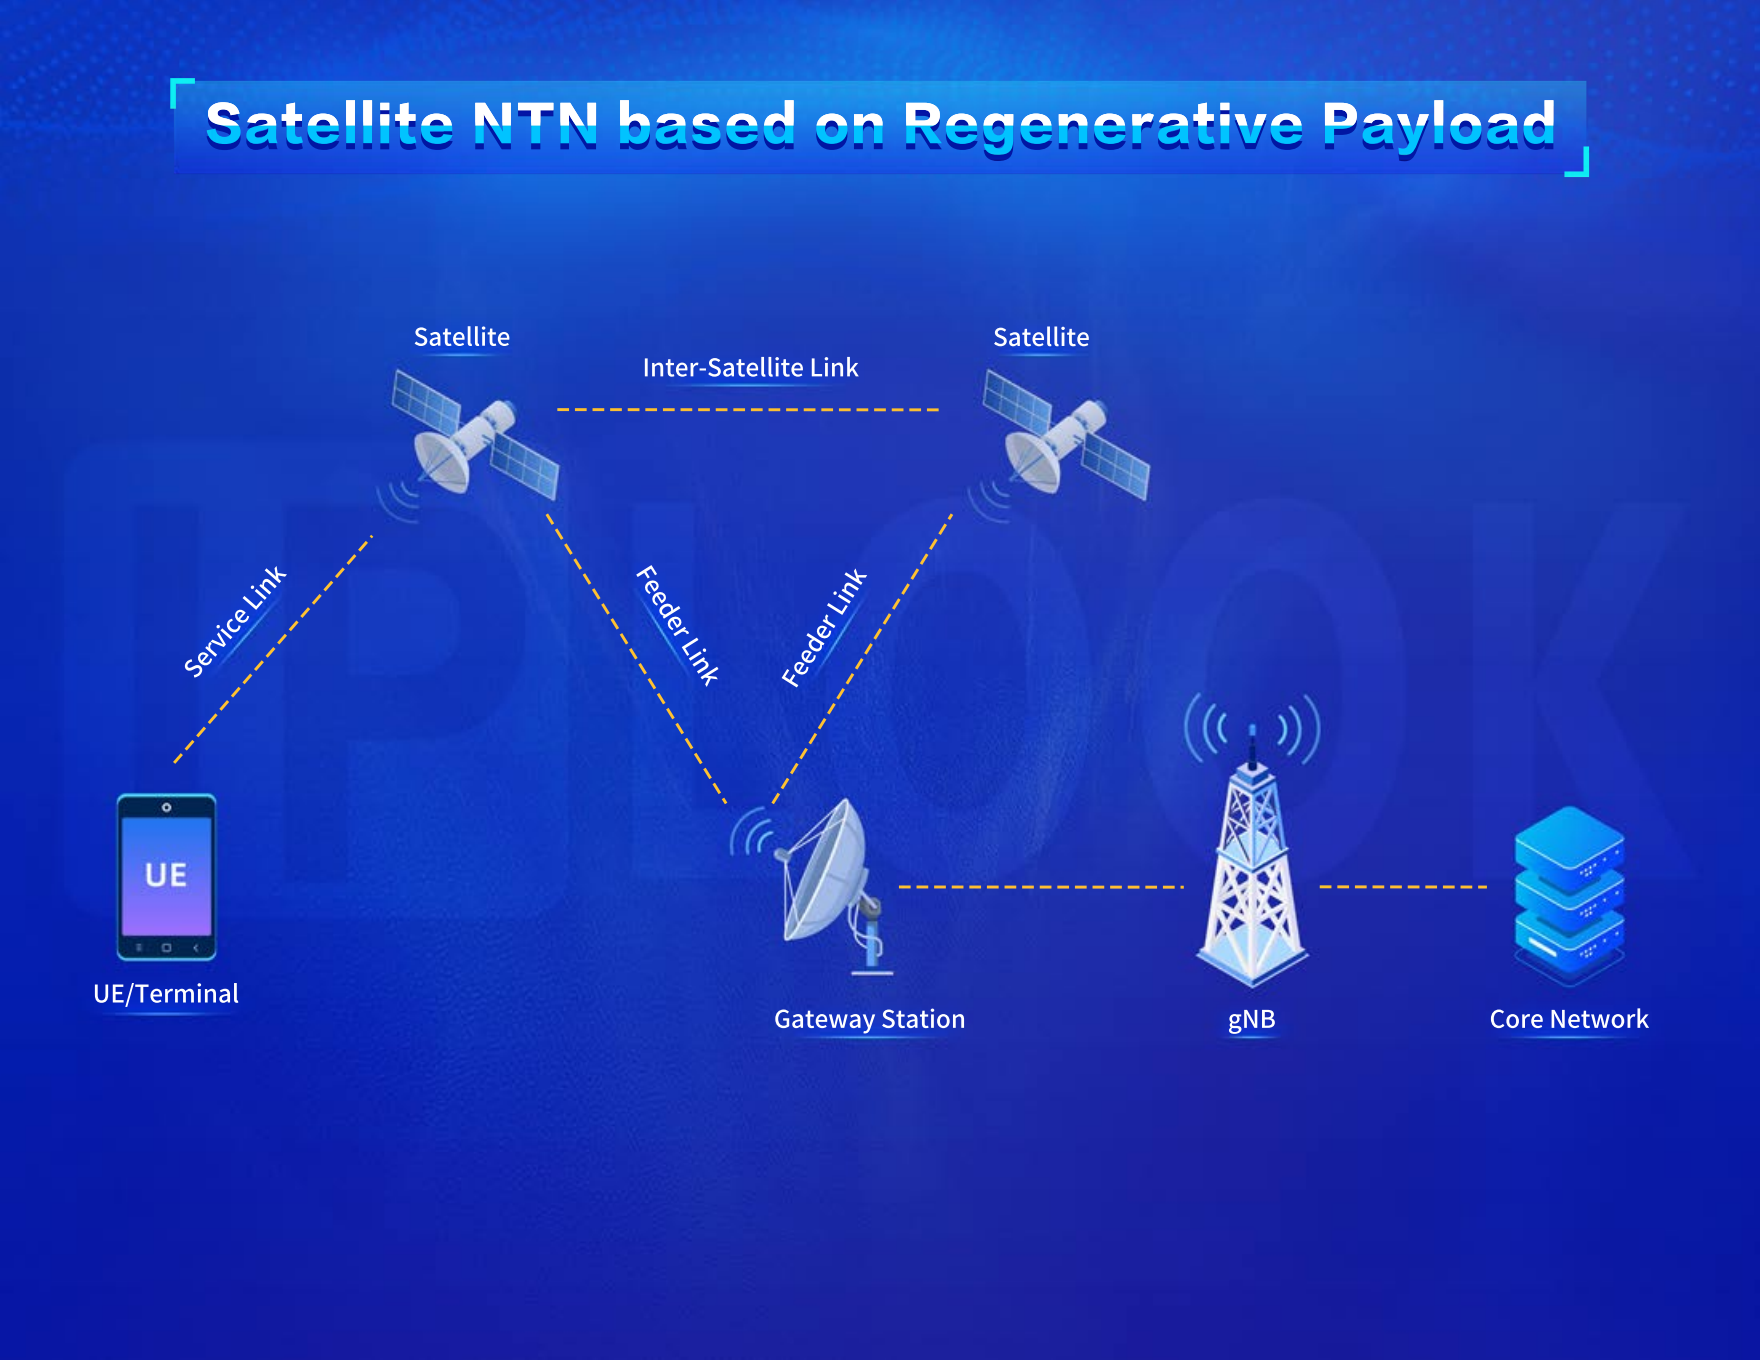 Satellite NTN based on Transparent Payload Architecture